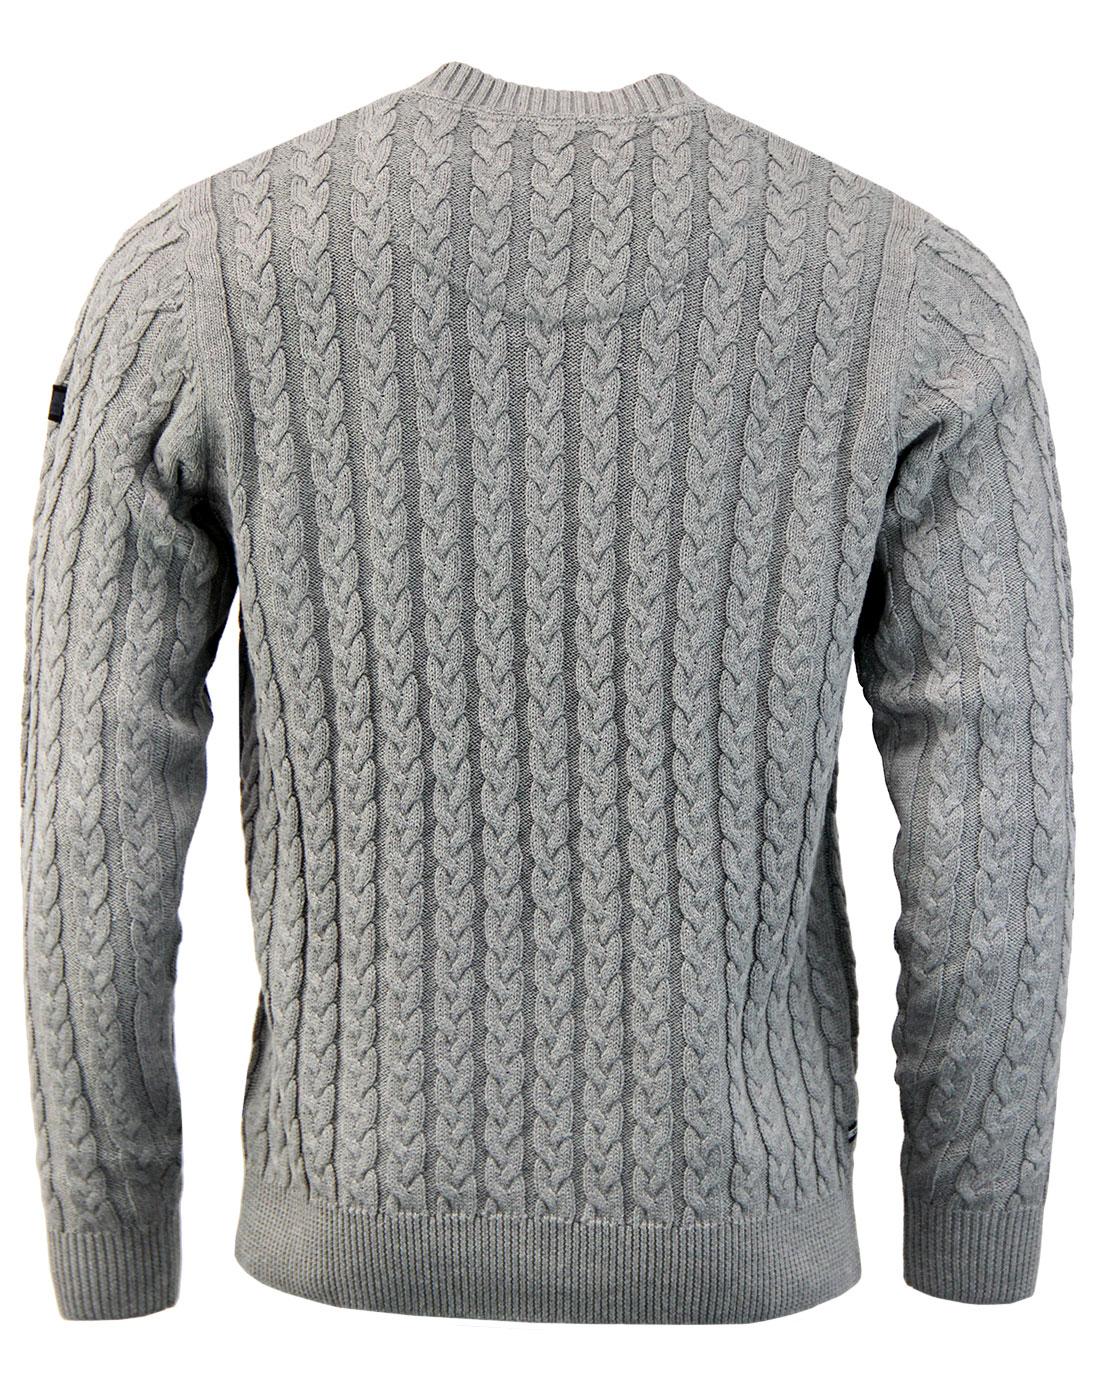 WEEKEND OFFENDER Woods Men's Retro 70s Cable Knit Jumper in Grey